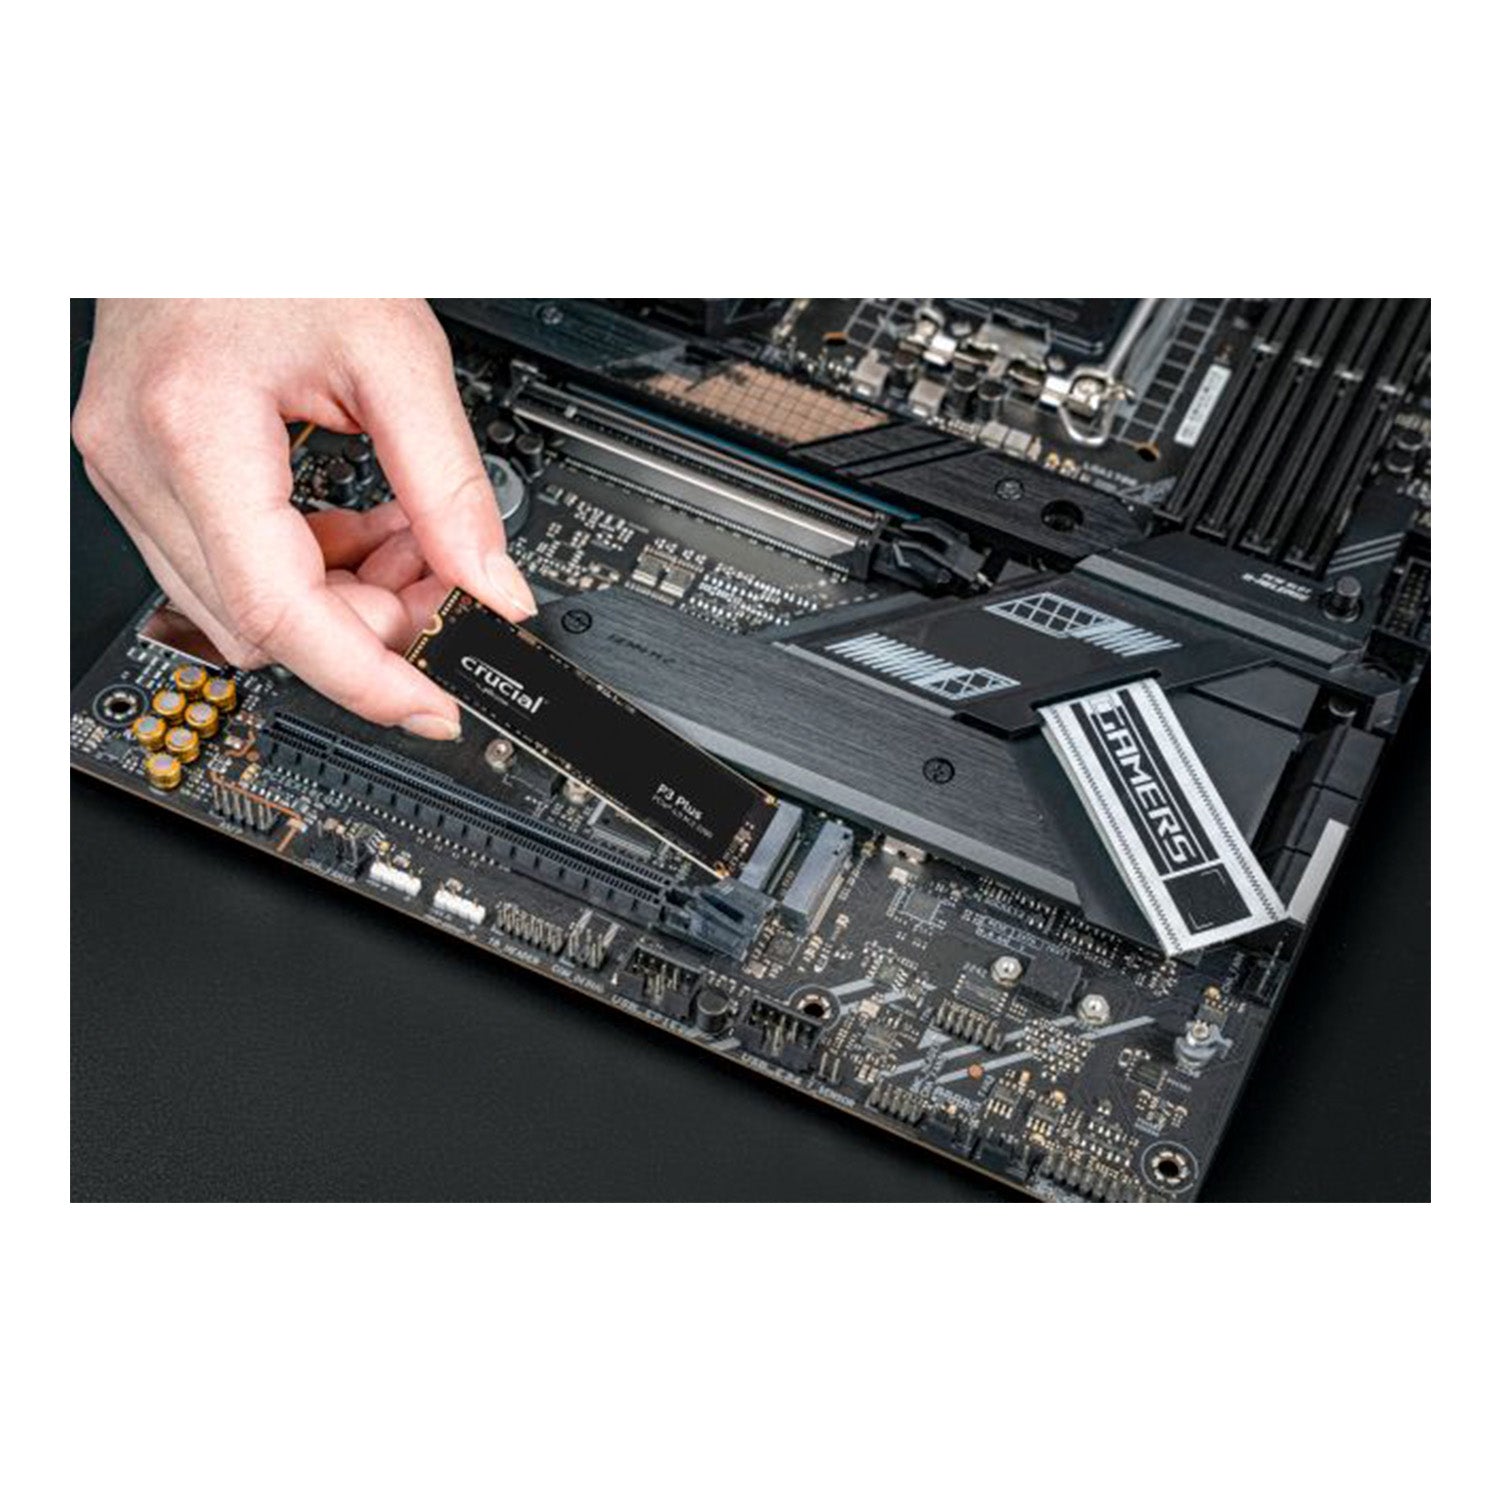 Crucial P3 Plus 2TB Solid State Drive PCIe 4.0 3D NAND NVMe M.2 SSD - High-Performance Storage up to 5000MB/s Desktop and Laptop - (CT2000P3PSSD8)